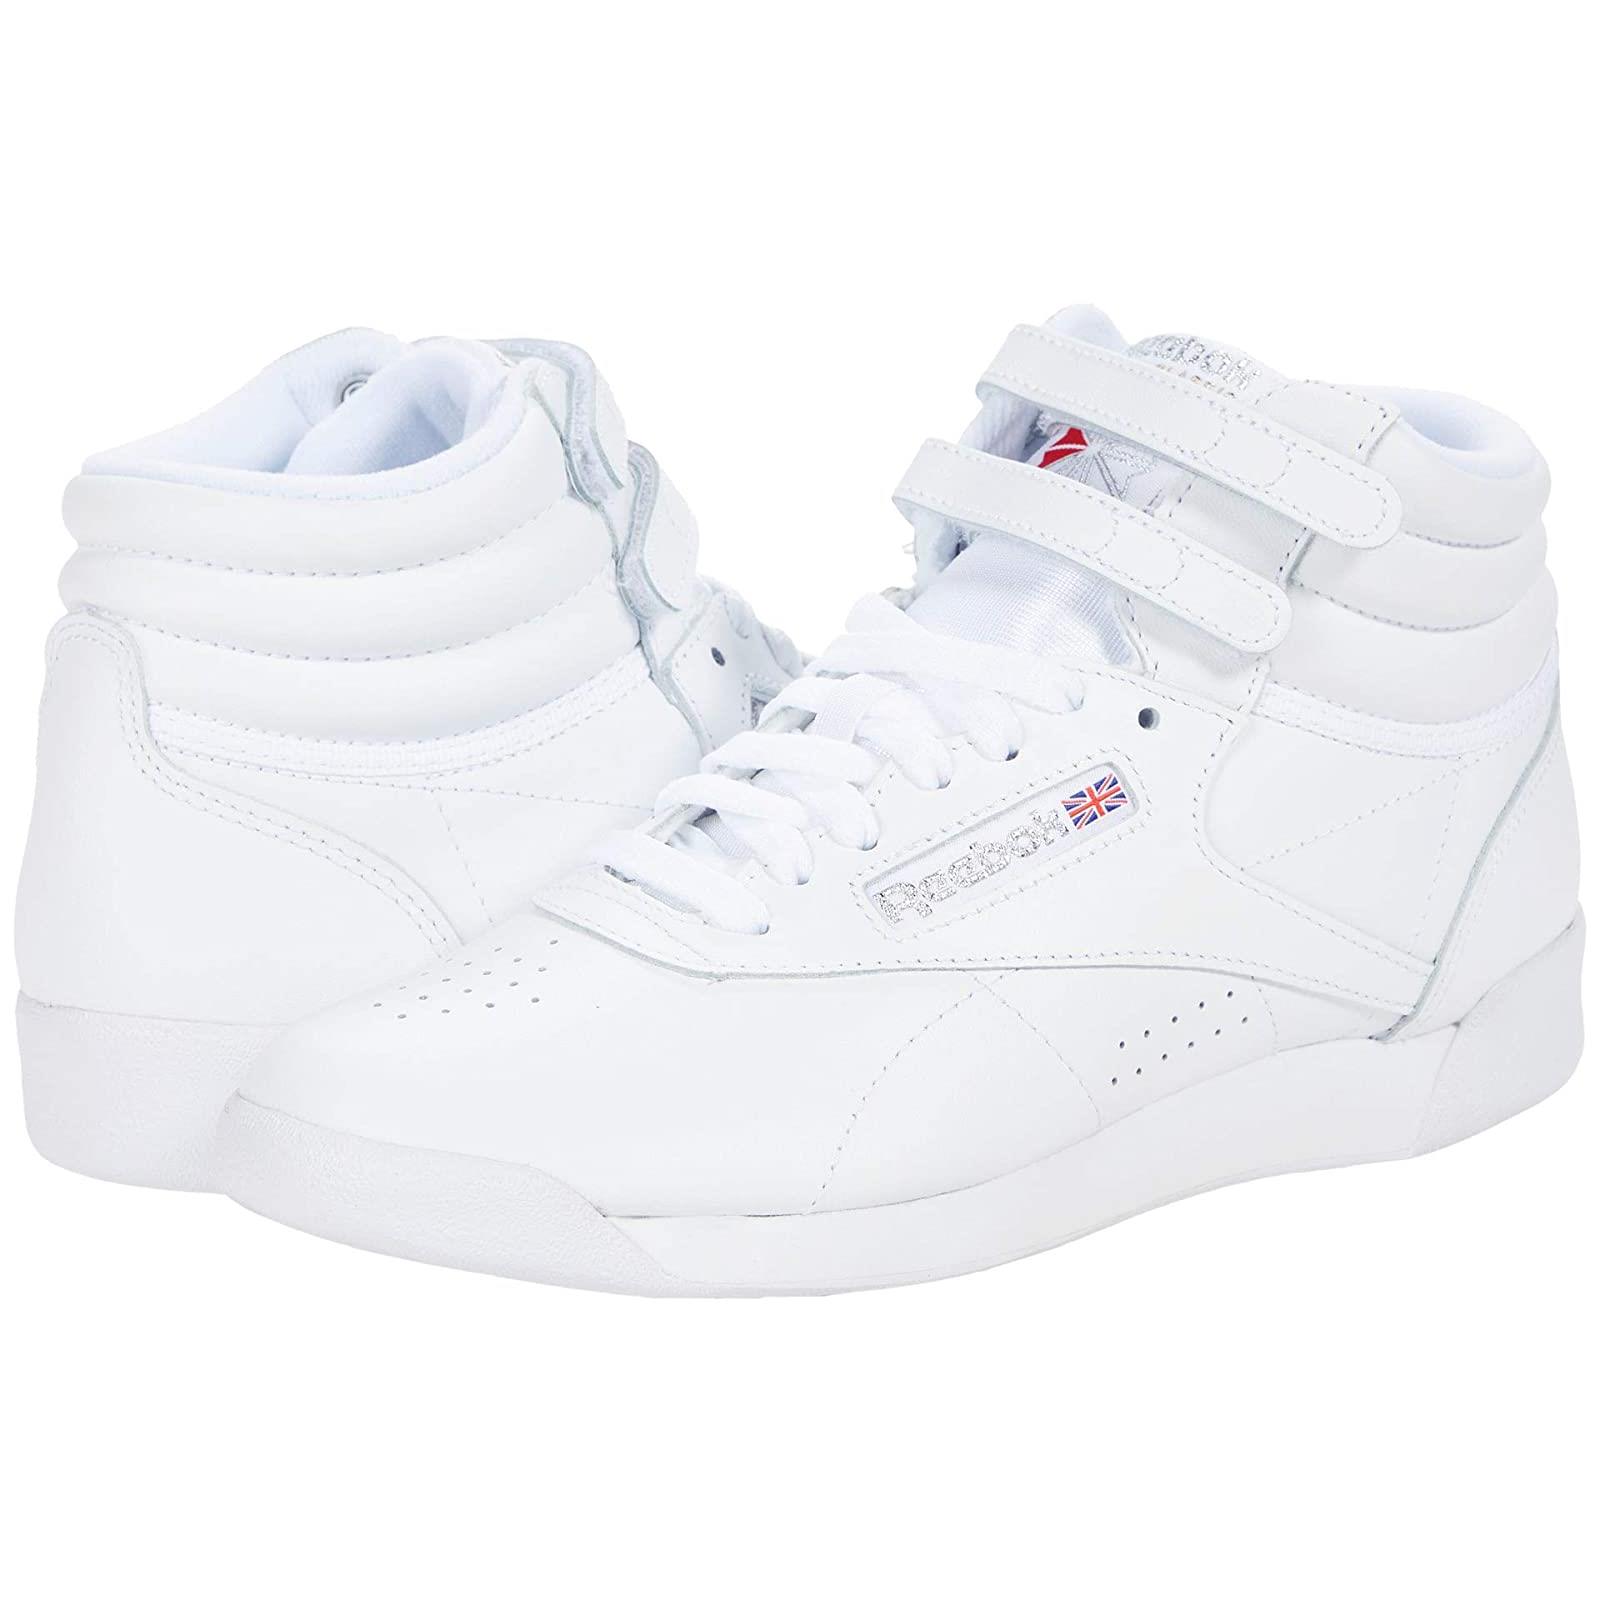 Woman`s Sneakers Athletic Shoes Reebok Lifestyle Freestyle Hi High Top White/Silver